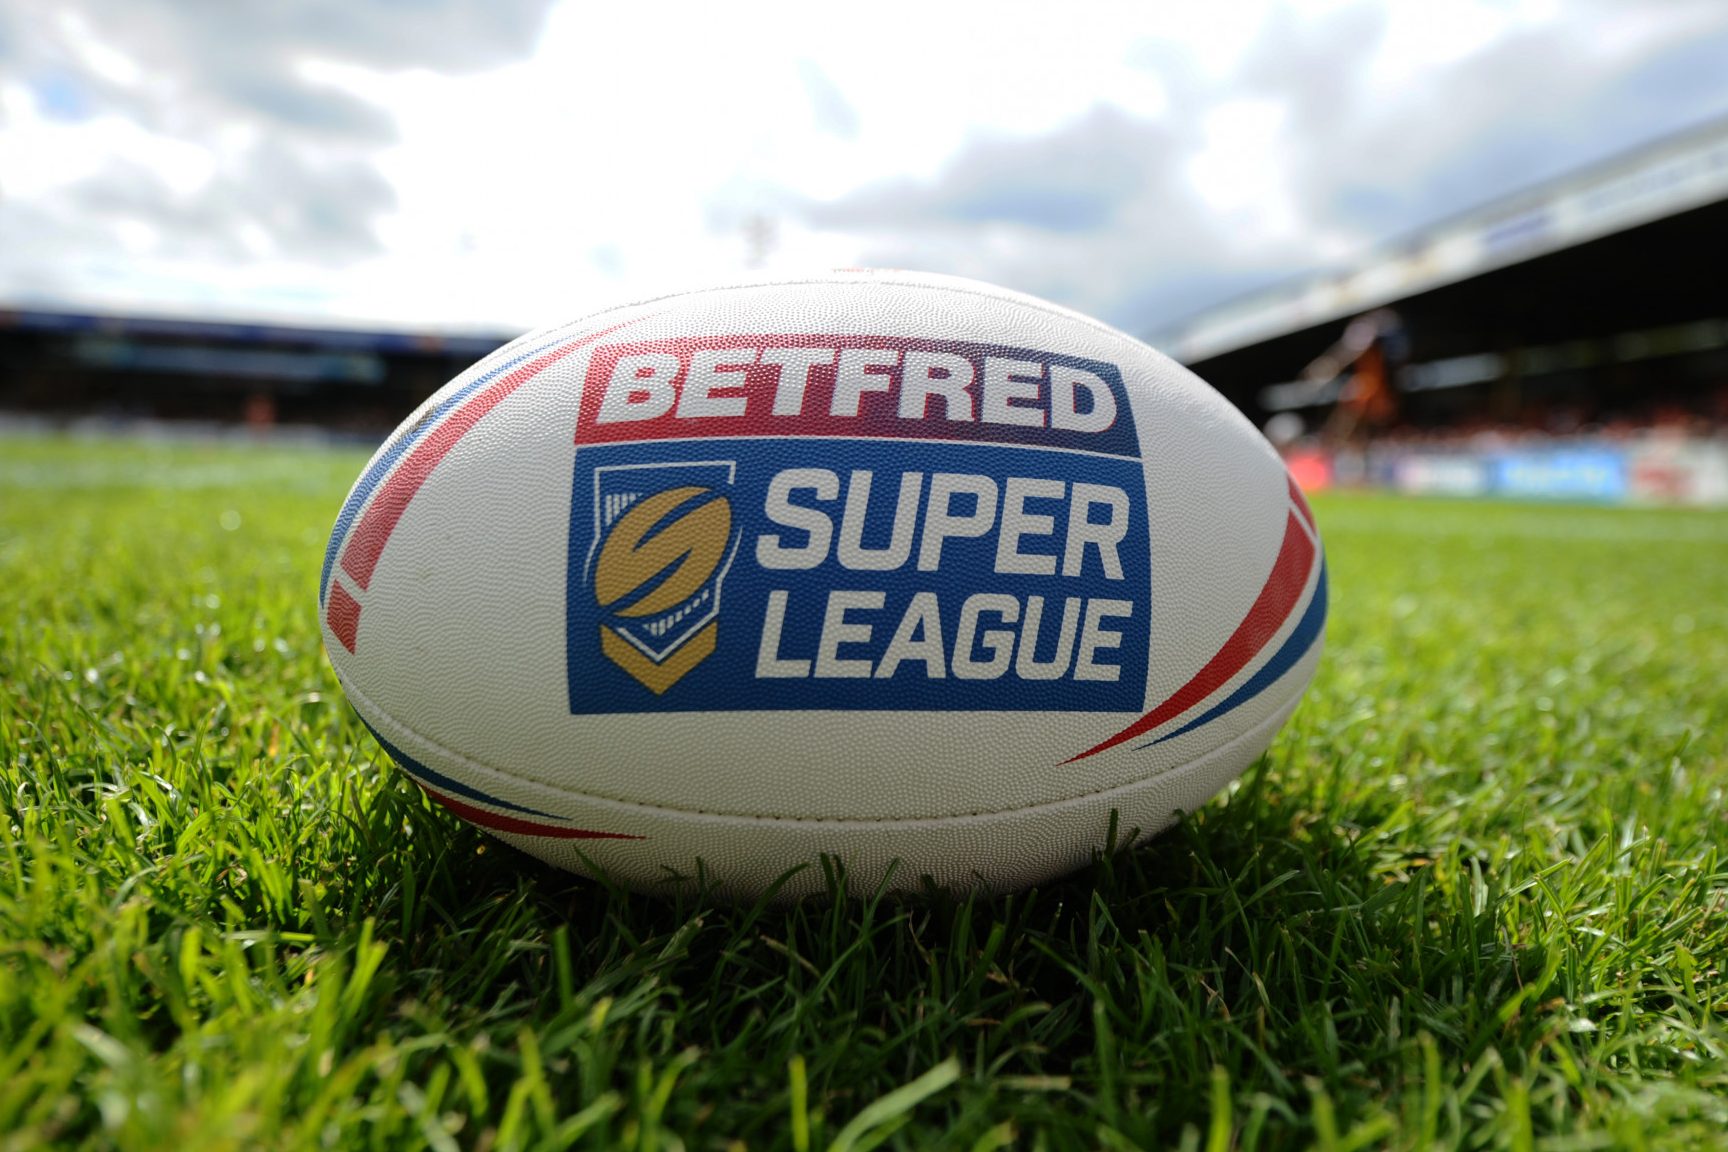 Super League agrees new Sky Sports deal for 2020 TV rights